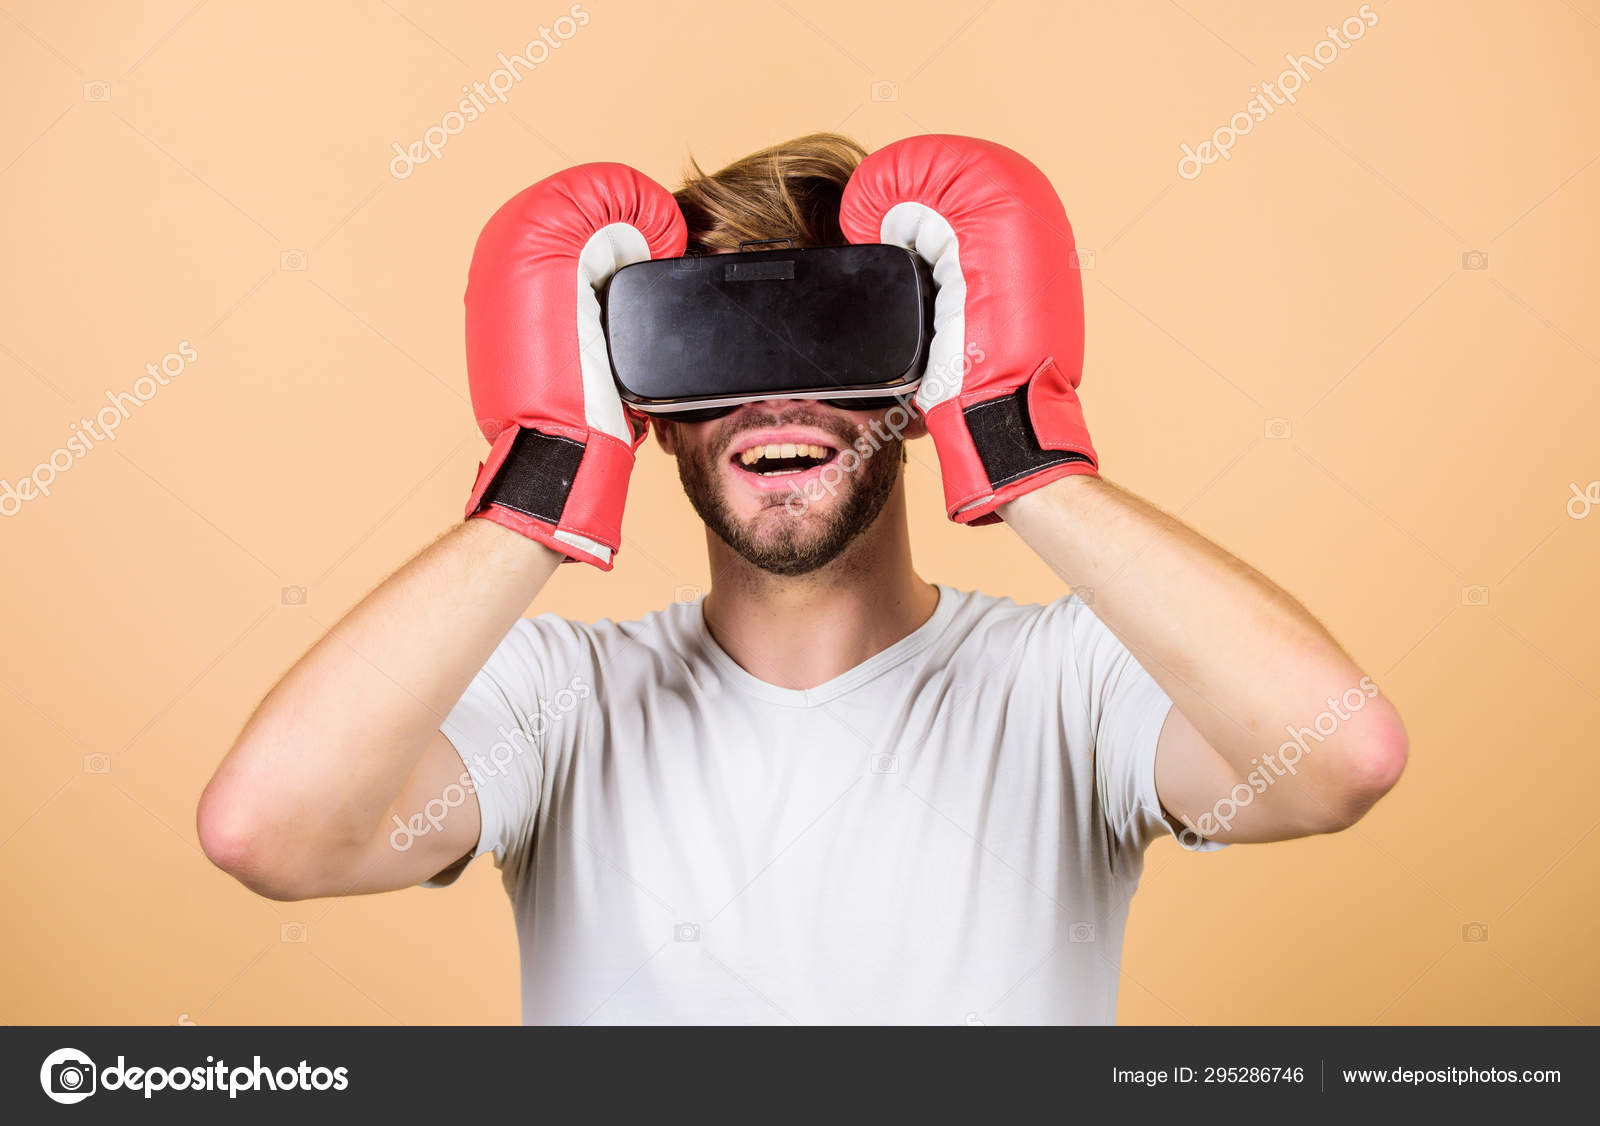 Cyber sport concept. Cyber coach online training. Cyber sportsman boxing gloves. Augmented 3D world. Man boxer virtual reality headset simulation